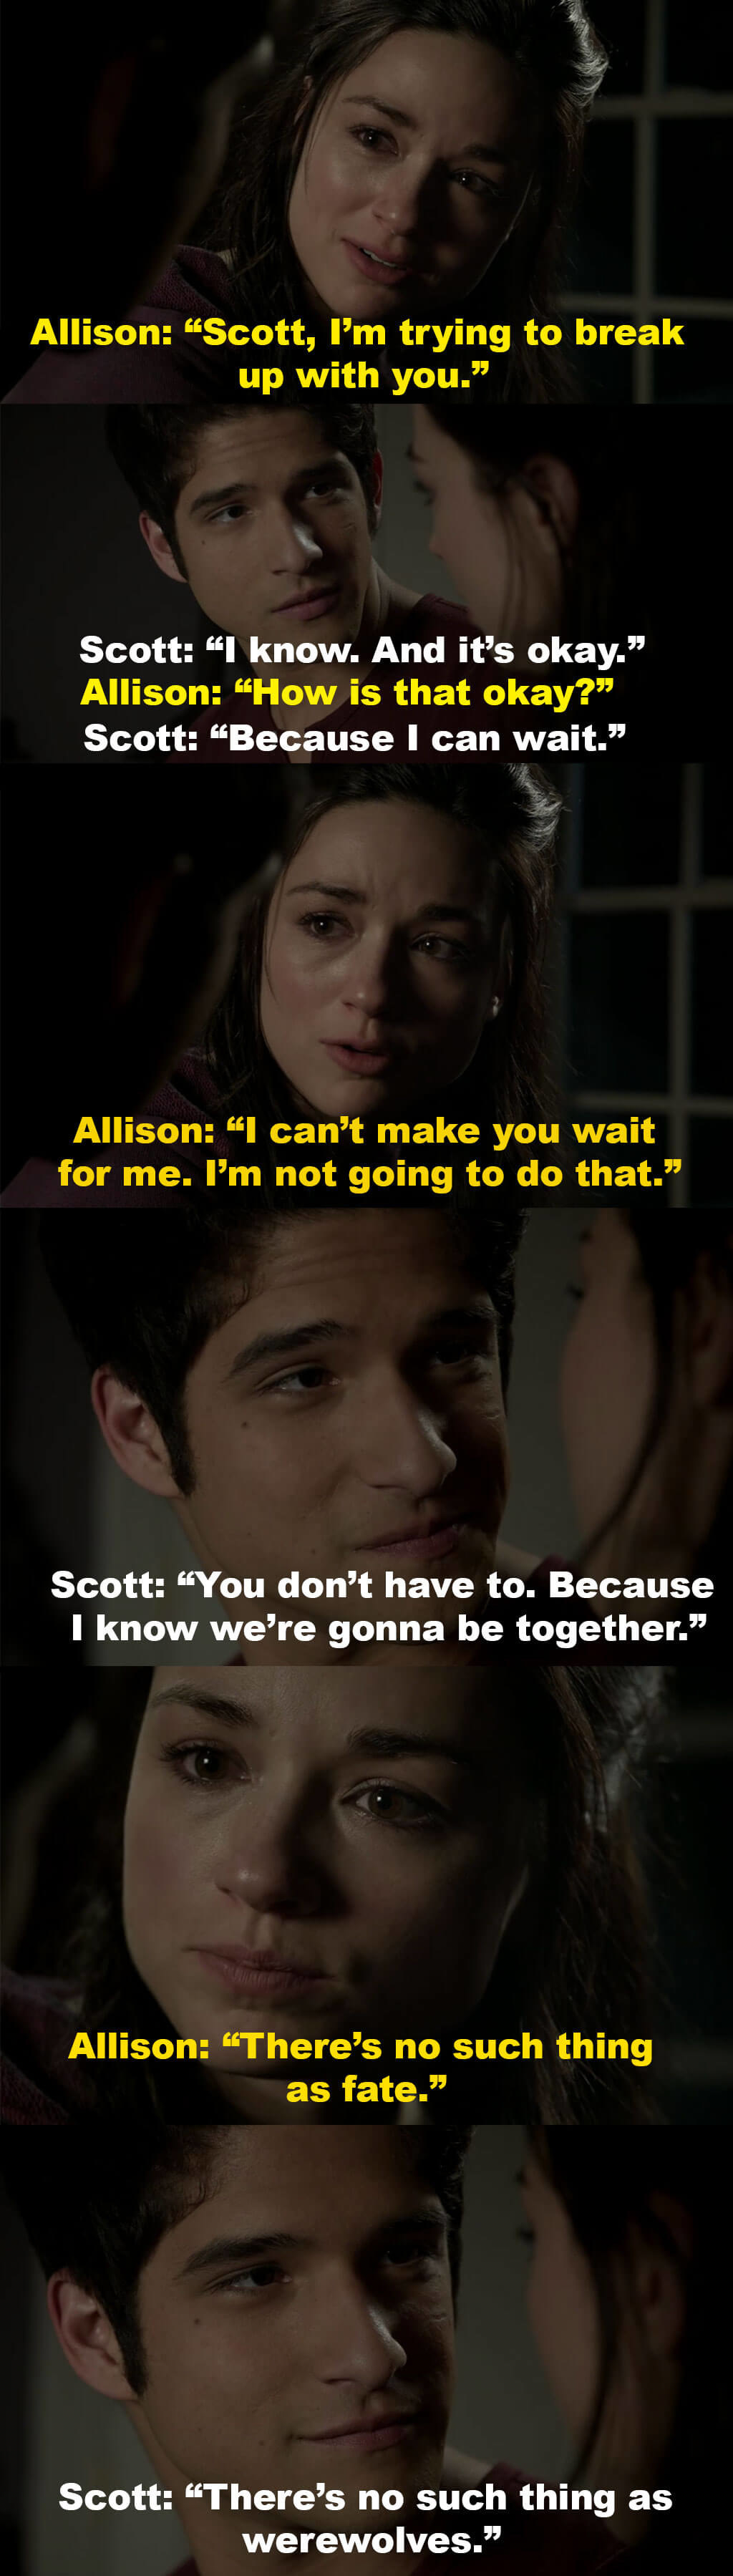 Scott says it&#x27;s okay that Allison is breaking up with him since he knows they&#x27;ll be together one day, and Allison tells him she can&#x27;t ask him to wait for her, and that there&#x27;s no such thing as fate, but Scott says  there&#x27;s no such thing as werewolves